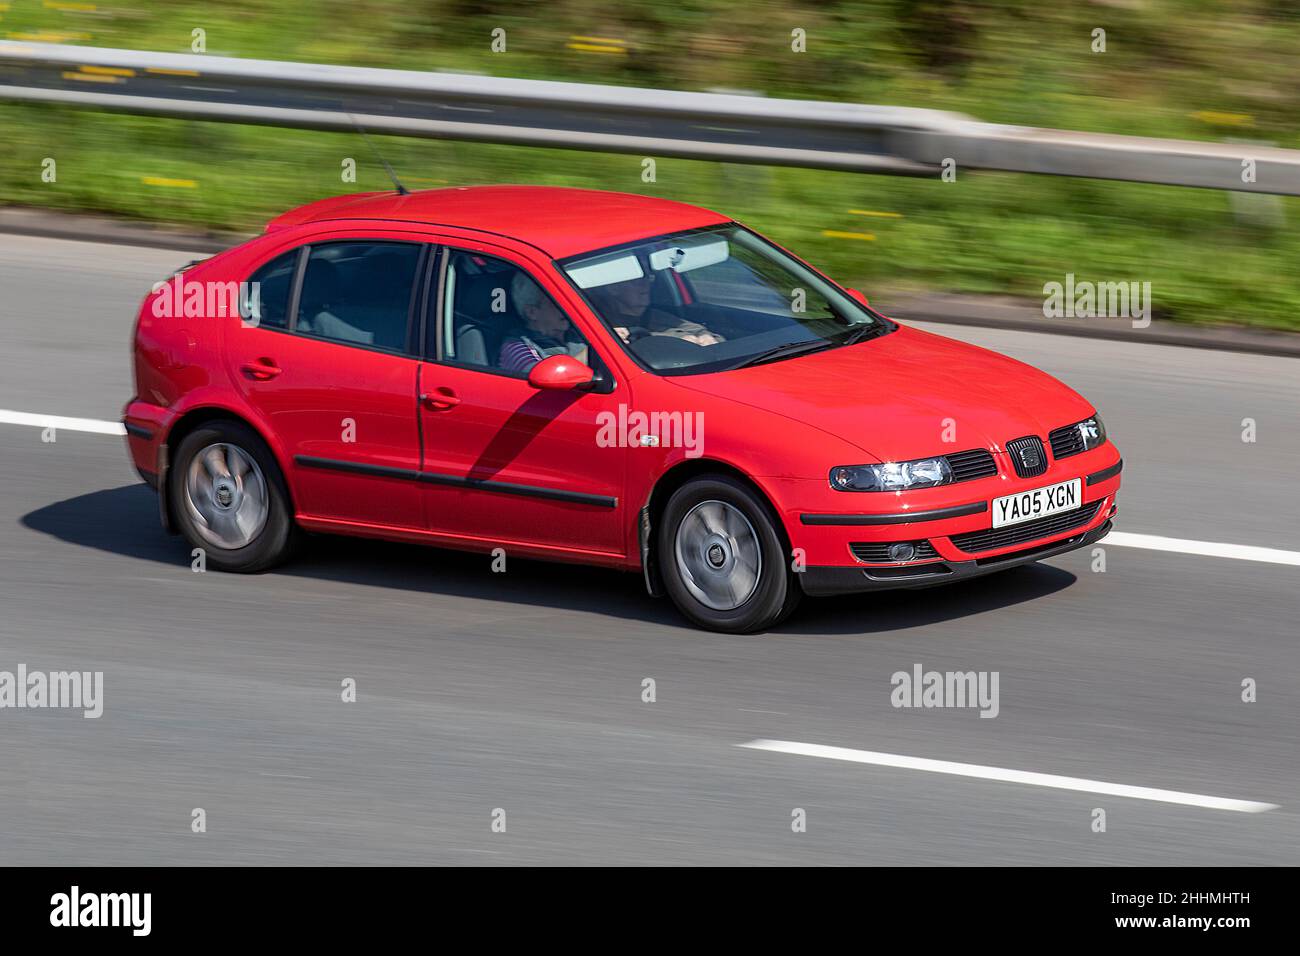 2005 red SEAT Leon SX 1598cc 5 speed manual; vehicular traffic, moving vehicles, petrol classic sports car, english, england, uk roads, motors, motoring, moving, cars driving vehicle, being driven, transport, travel, cars driving vehicle, in motion, uk Stock Photo